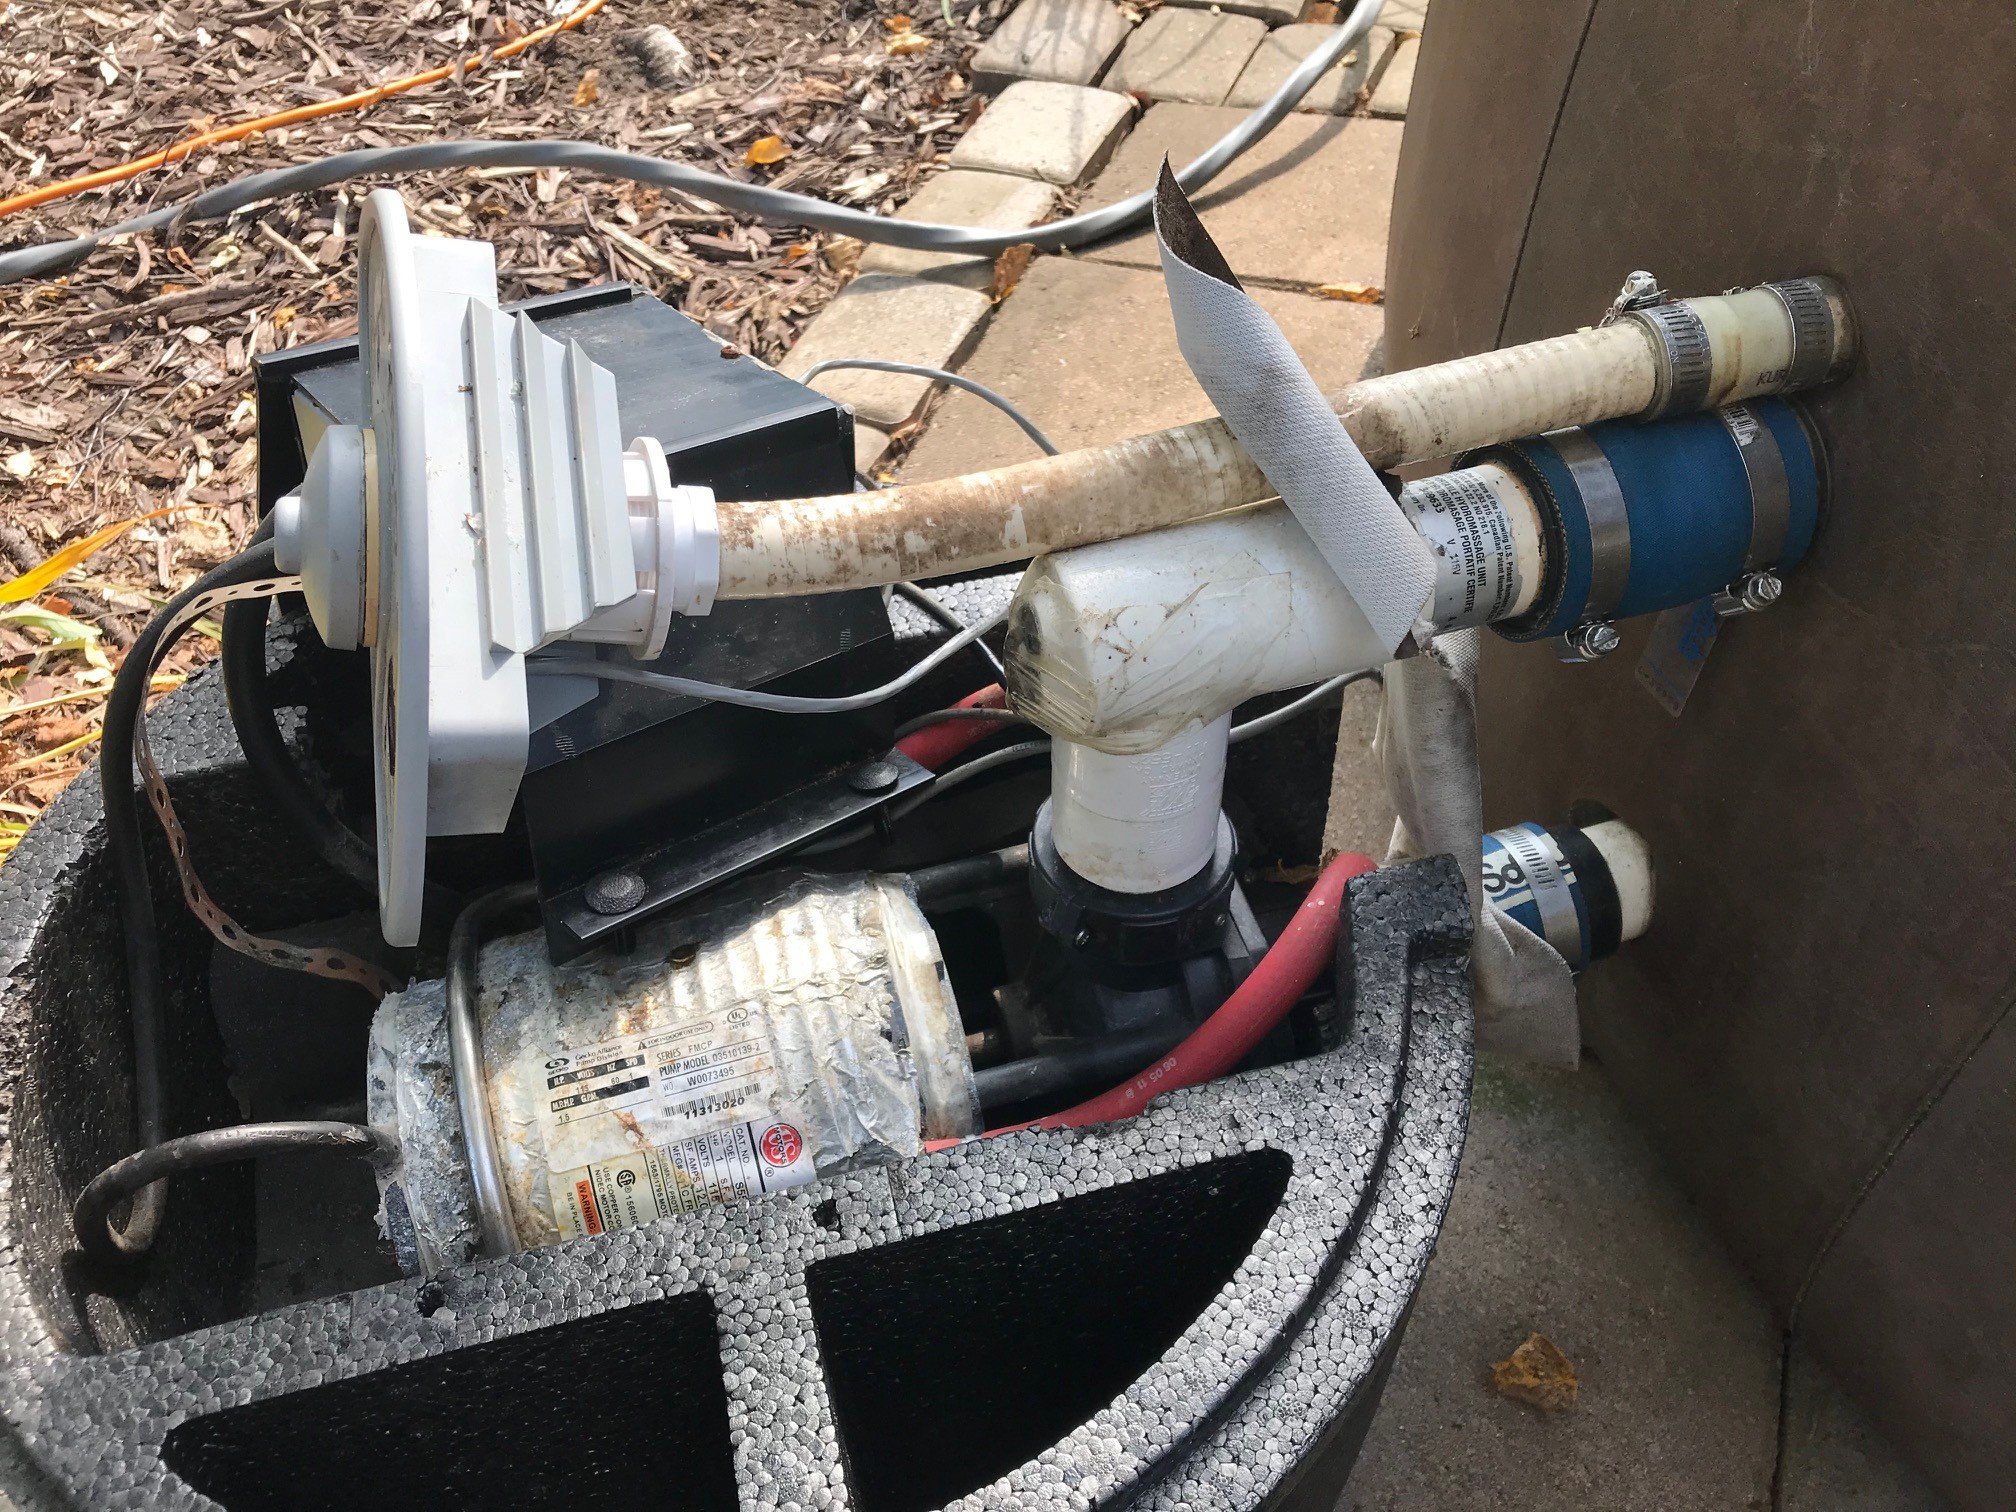 HELP -- softub motor stopped working - Portable Hot Tubs & Spas - Pool Tankless Water Heater Sounds Like A Jet Engine